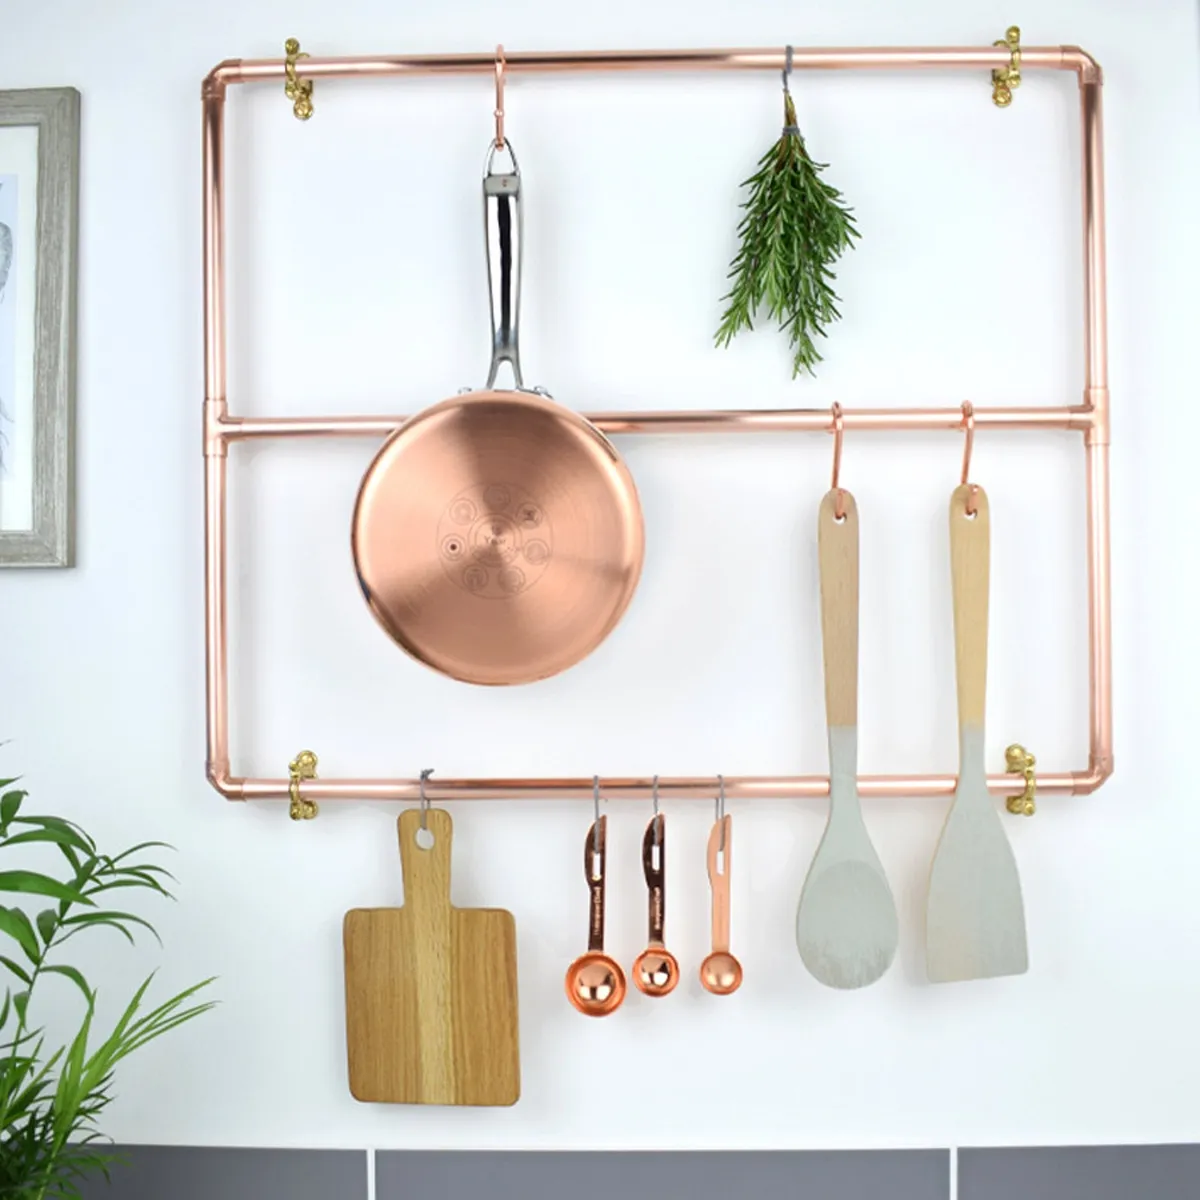 Bespoke Modern Copper Pot and Pan Rack, from £57, Etsy